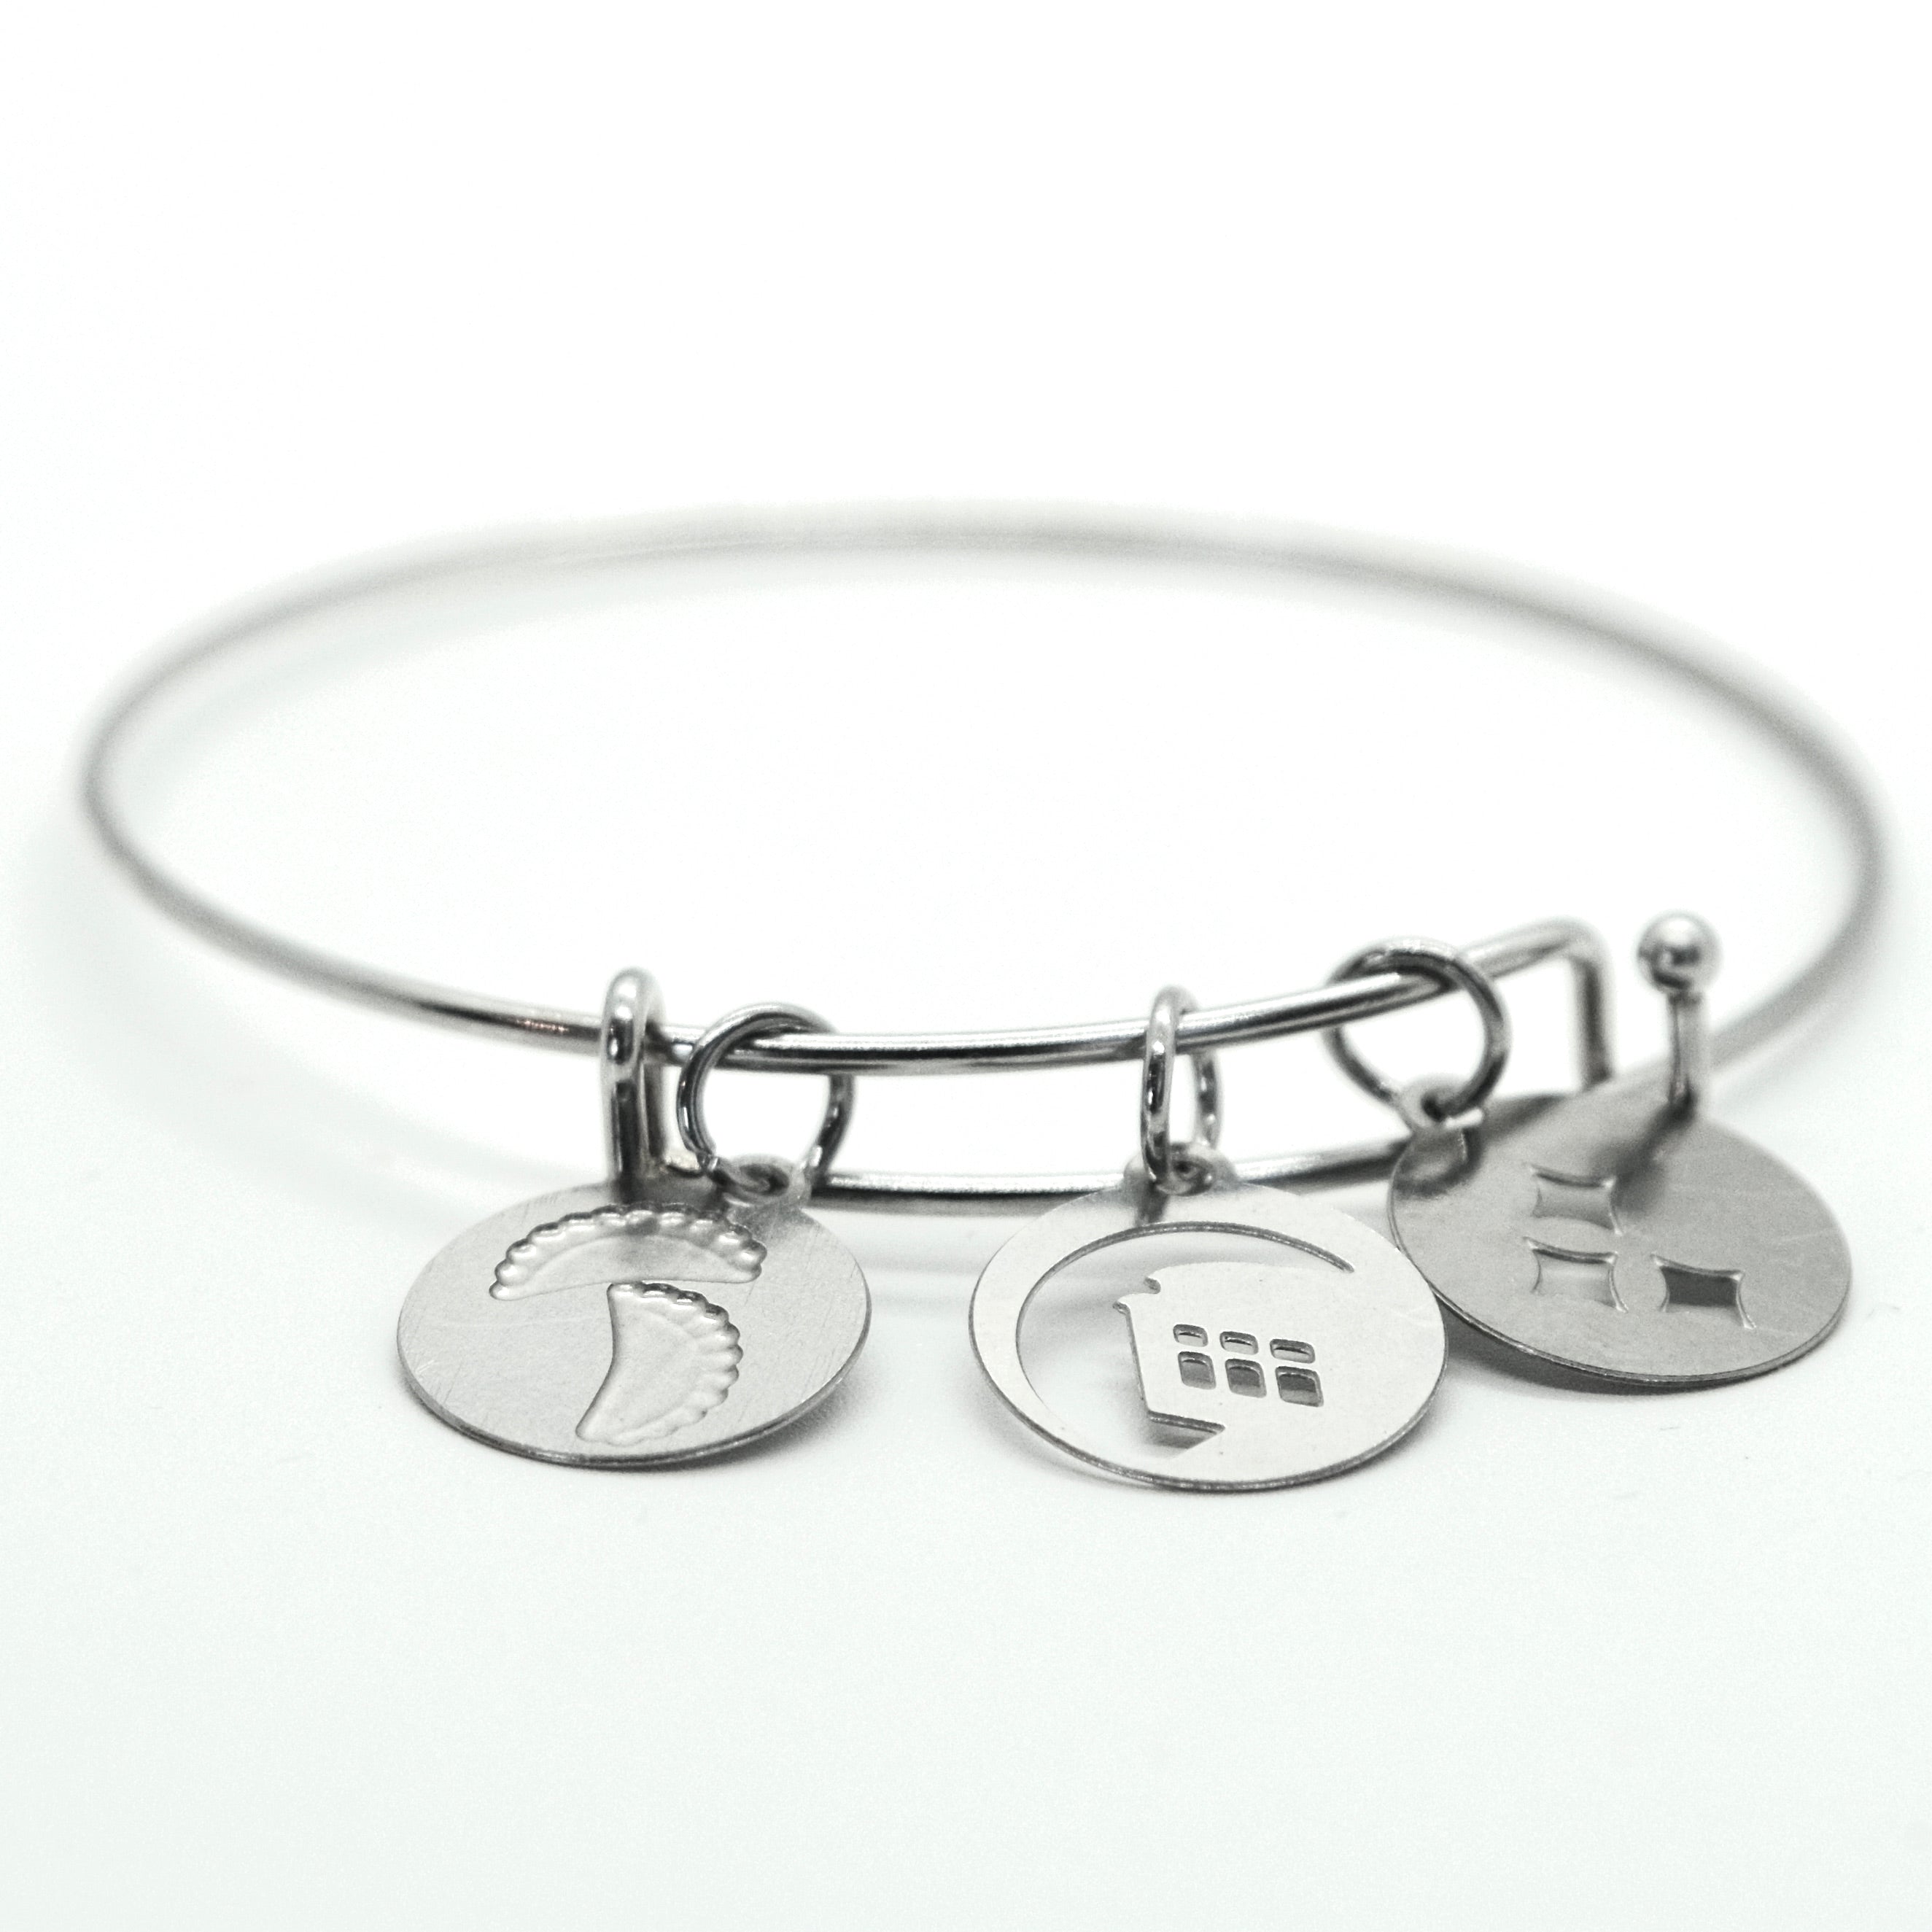 Build your own Pittsburgh Bangle Charm Bracelet